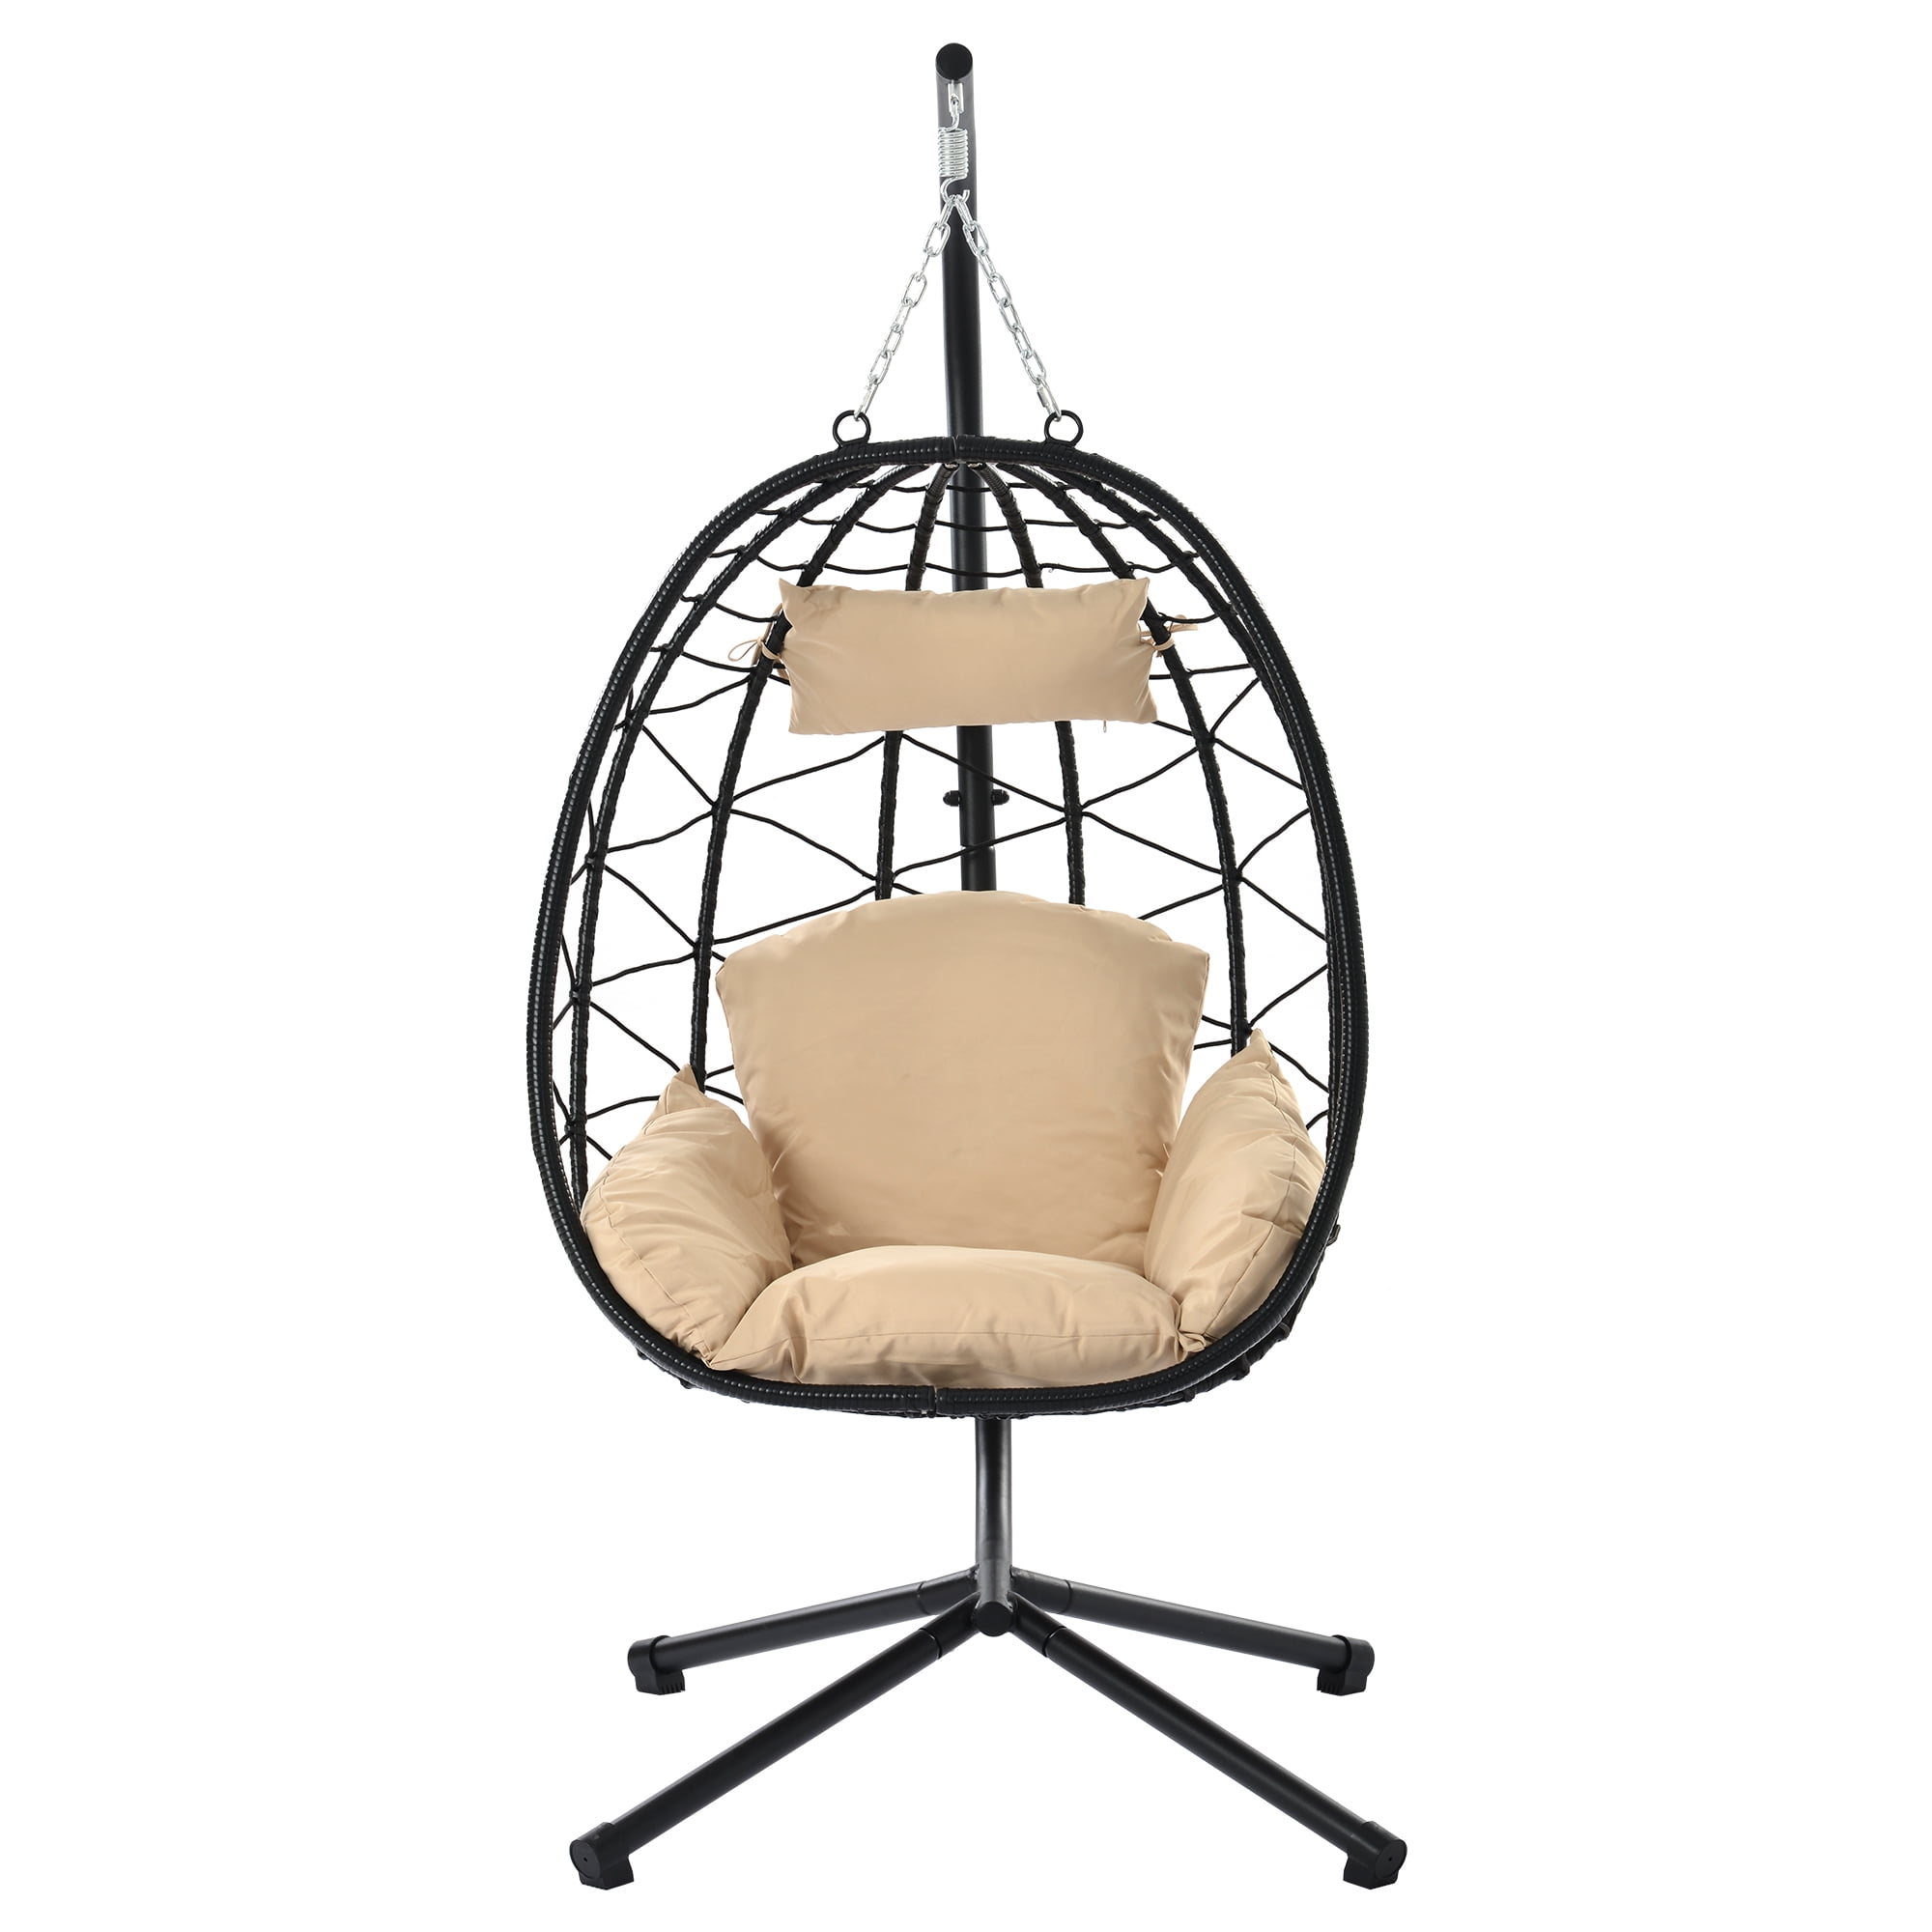 Swing Egg Chair Hammock Chair Hanging Chair with Stand for Indoor Outdoor, Patio Porch Wicker Rattan Chair with Steel Frame and UV Resistant Cushion - Beige